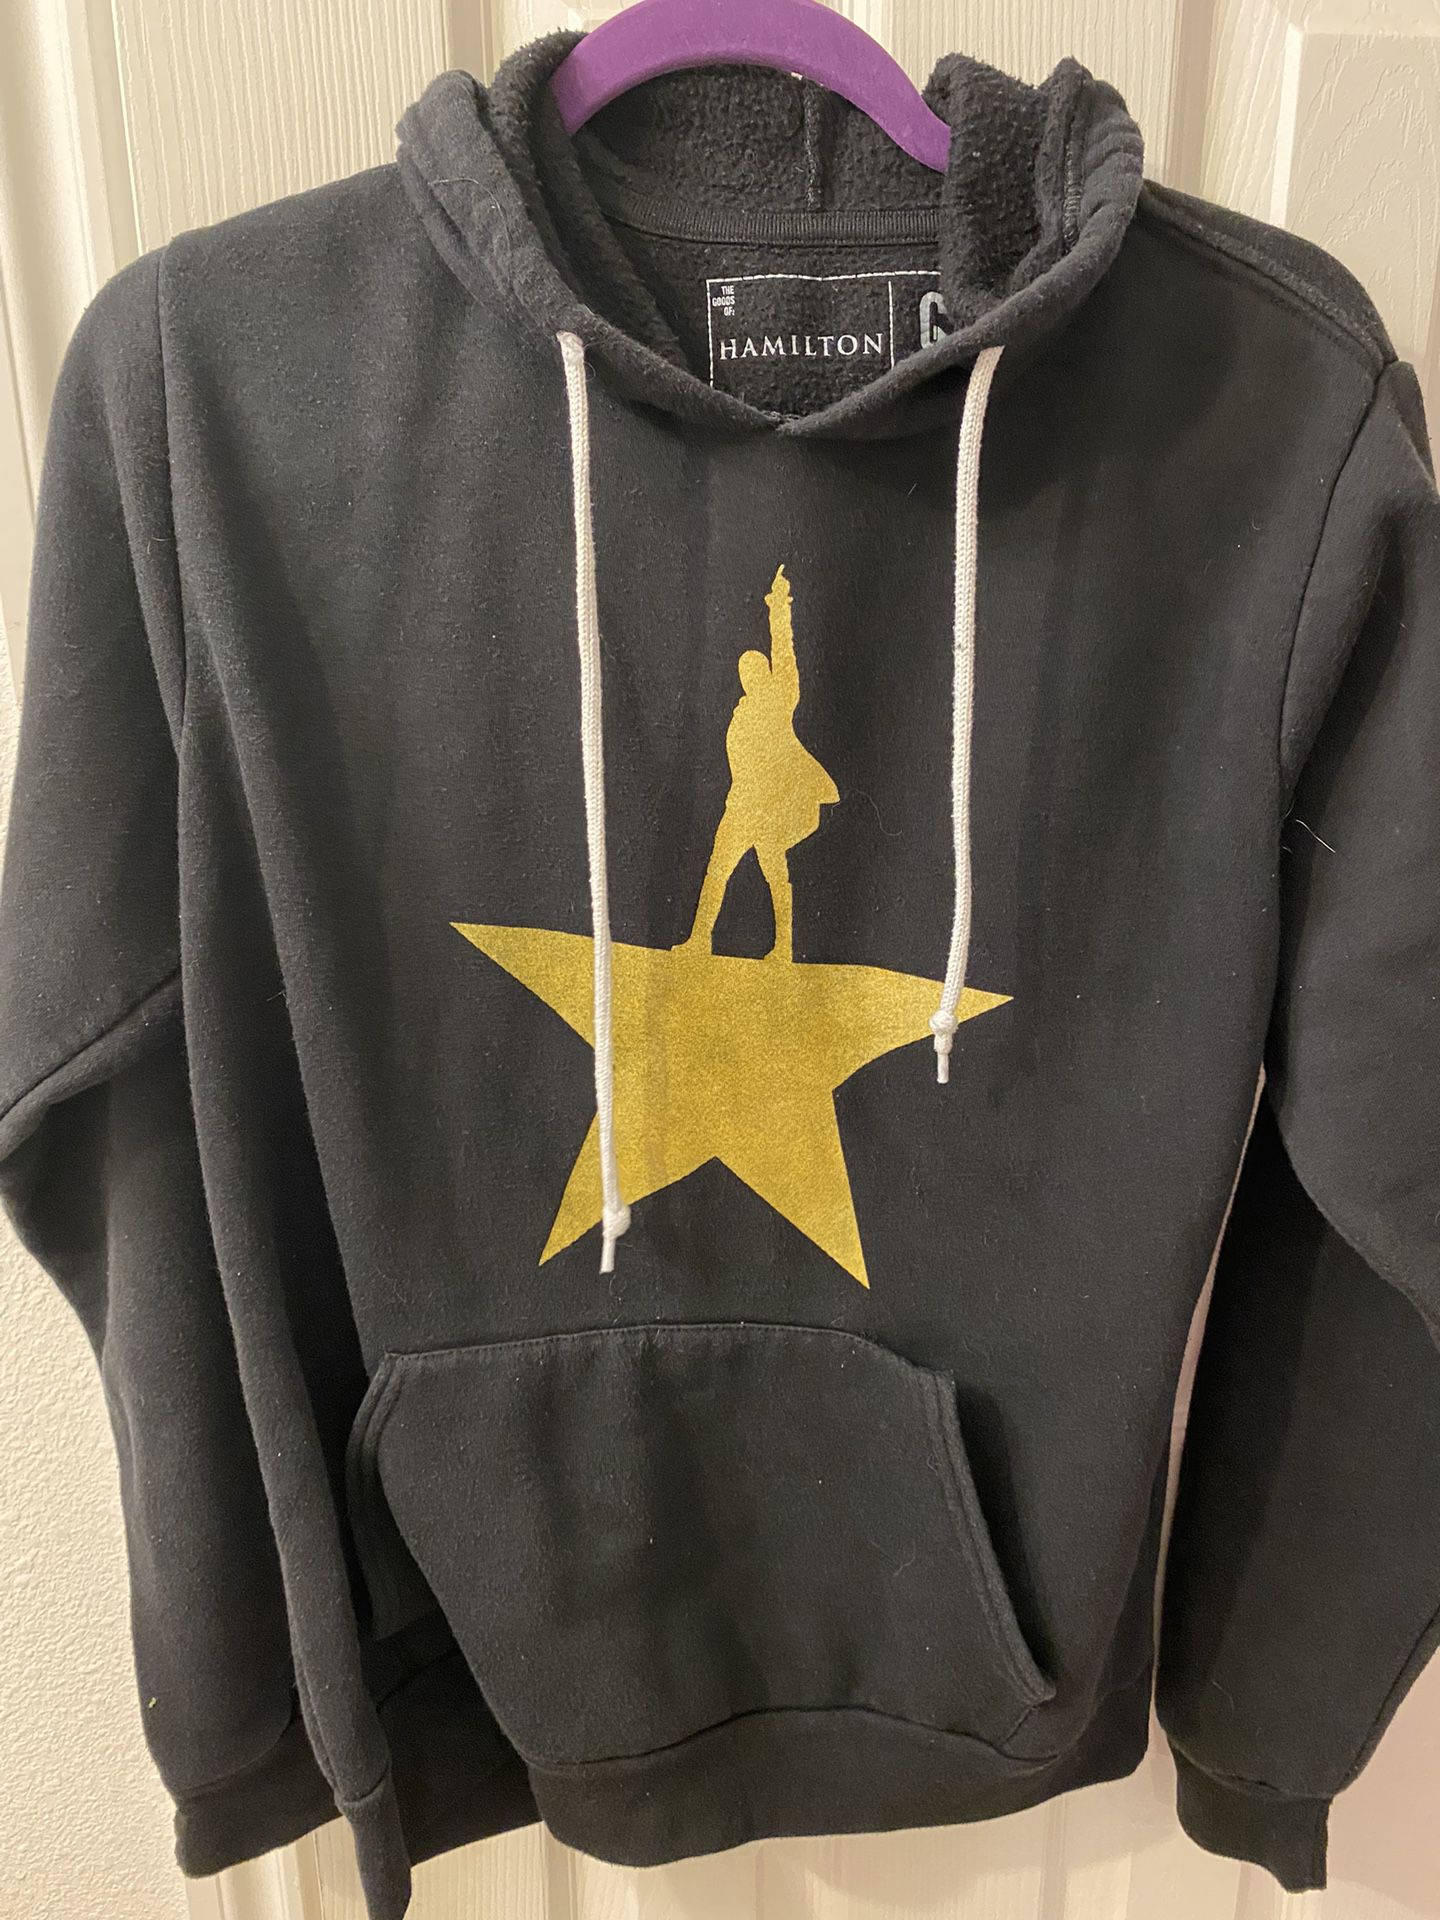 Hamilton Musical Hoodie Adult Small Black Fleece Lined Sweater Authentic Excellent condition 